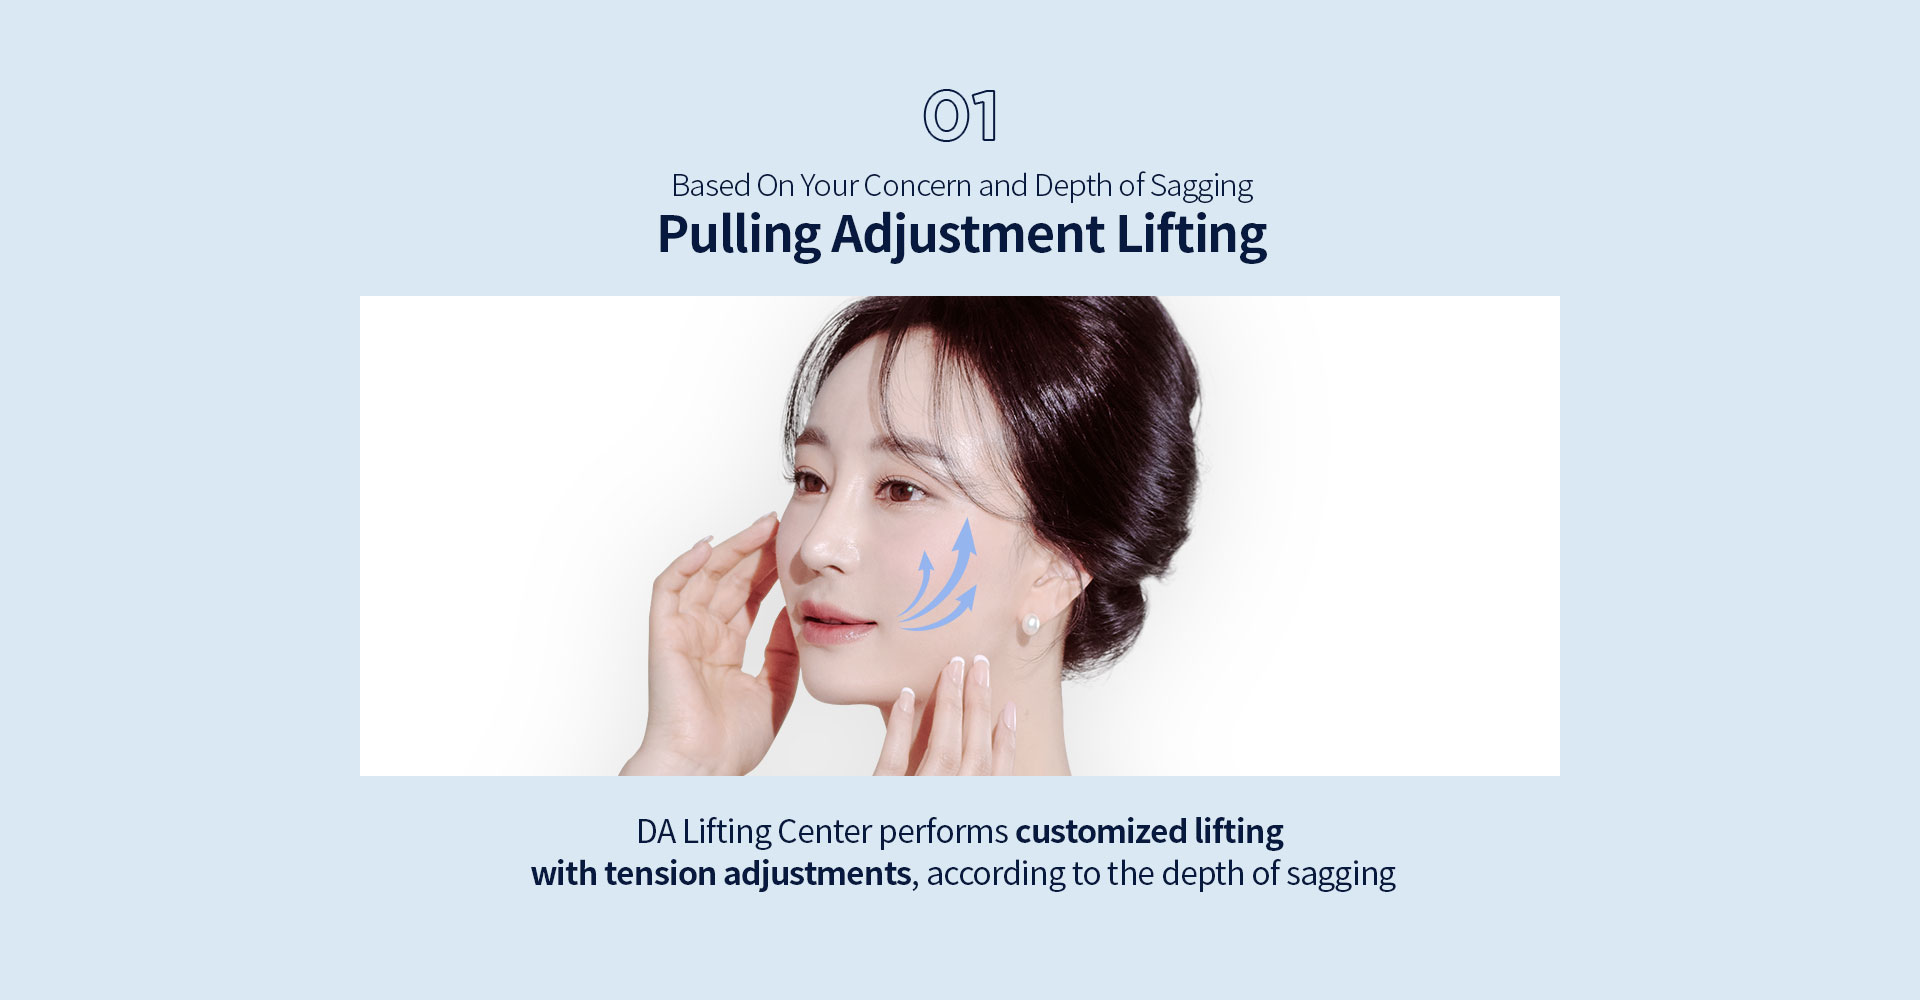 01. For your concerns and depth of sagging. pulling adjustment lifting